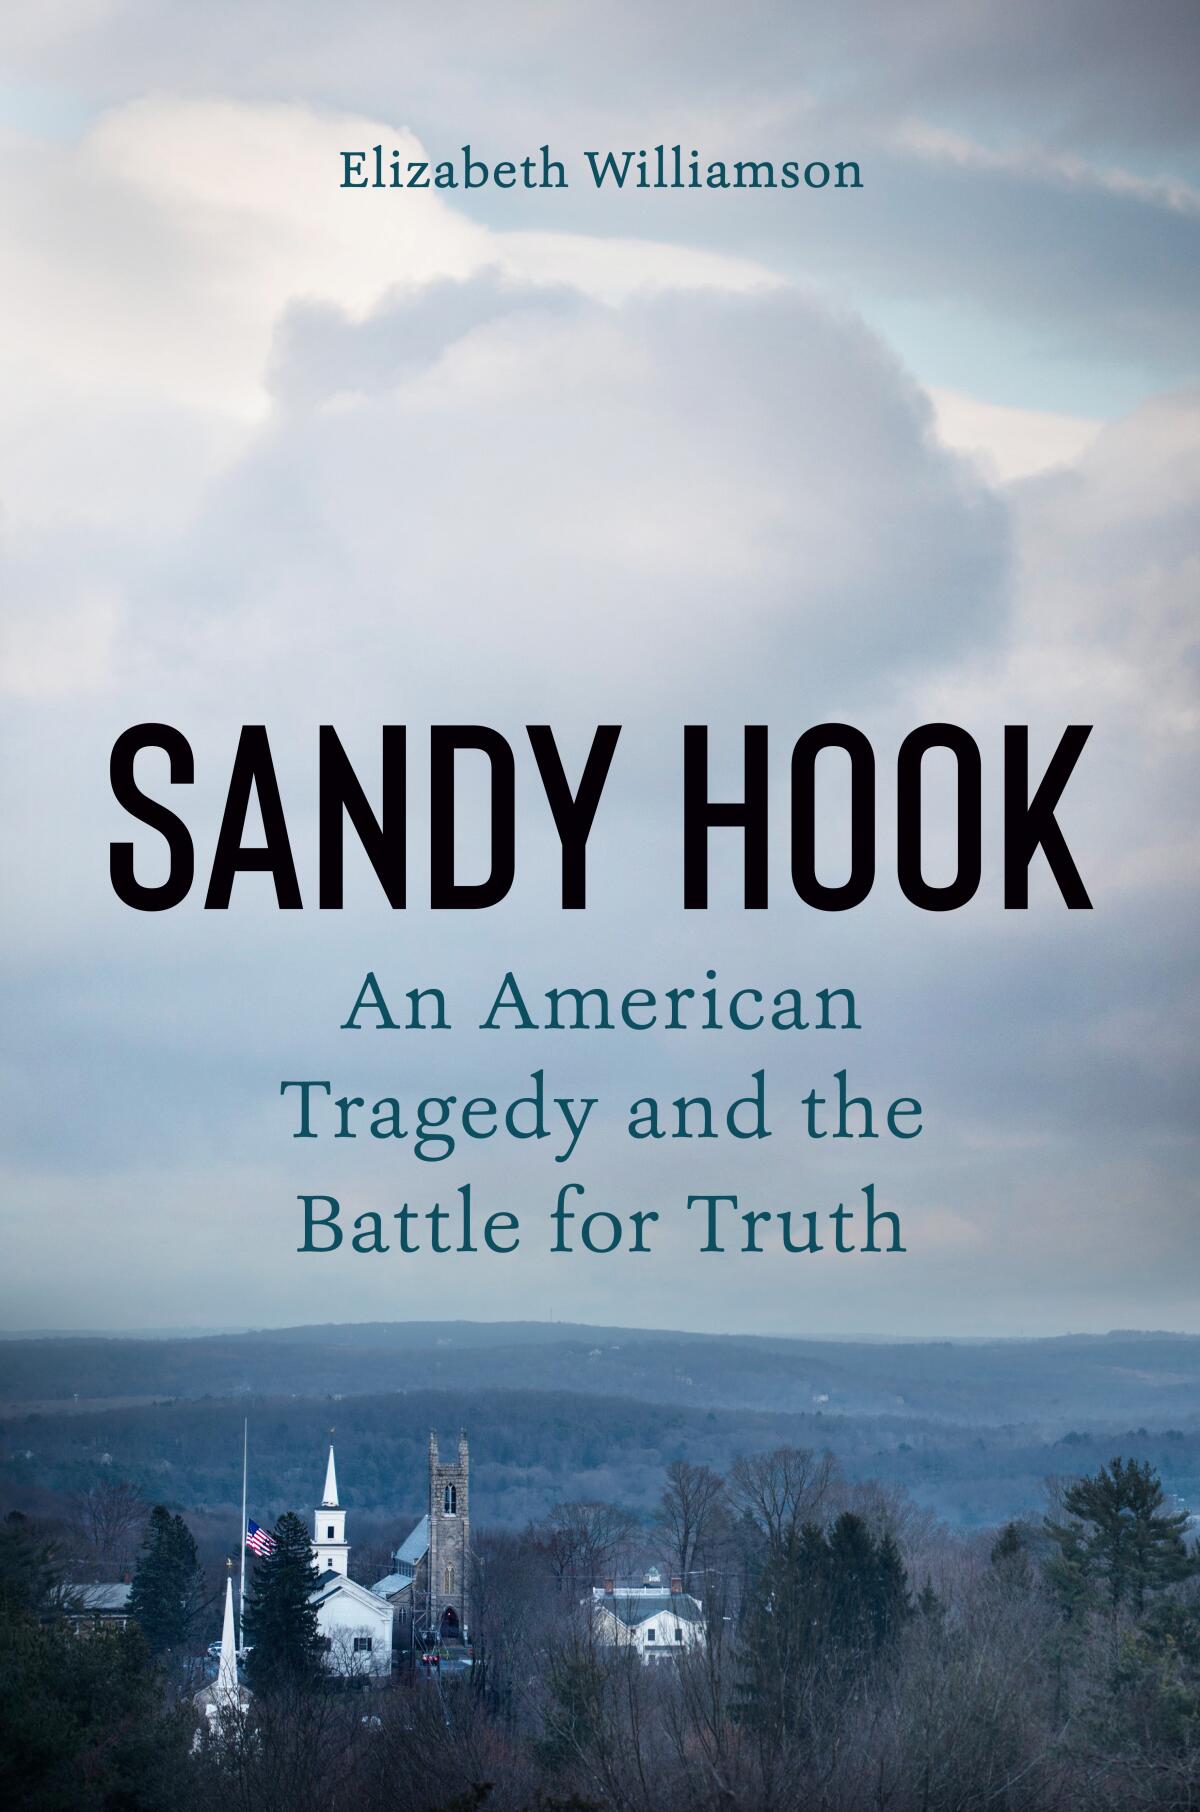 "Sandy Hook: An American Tragedy and the Battle for Truth," by Elizabeth Williamson